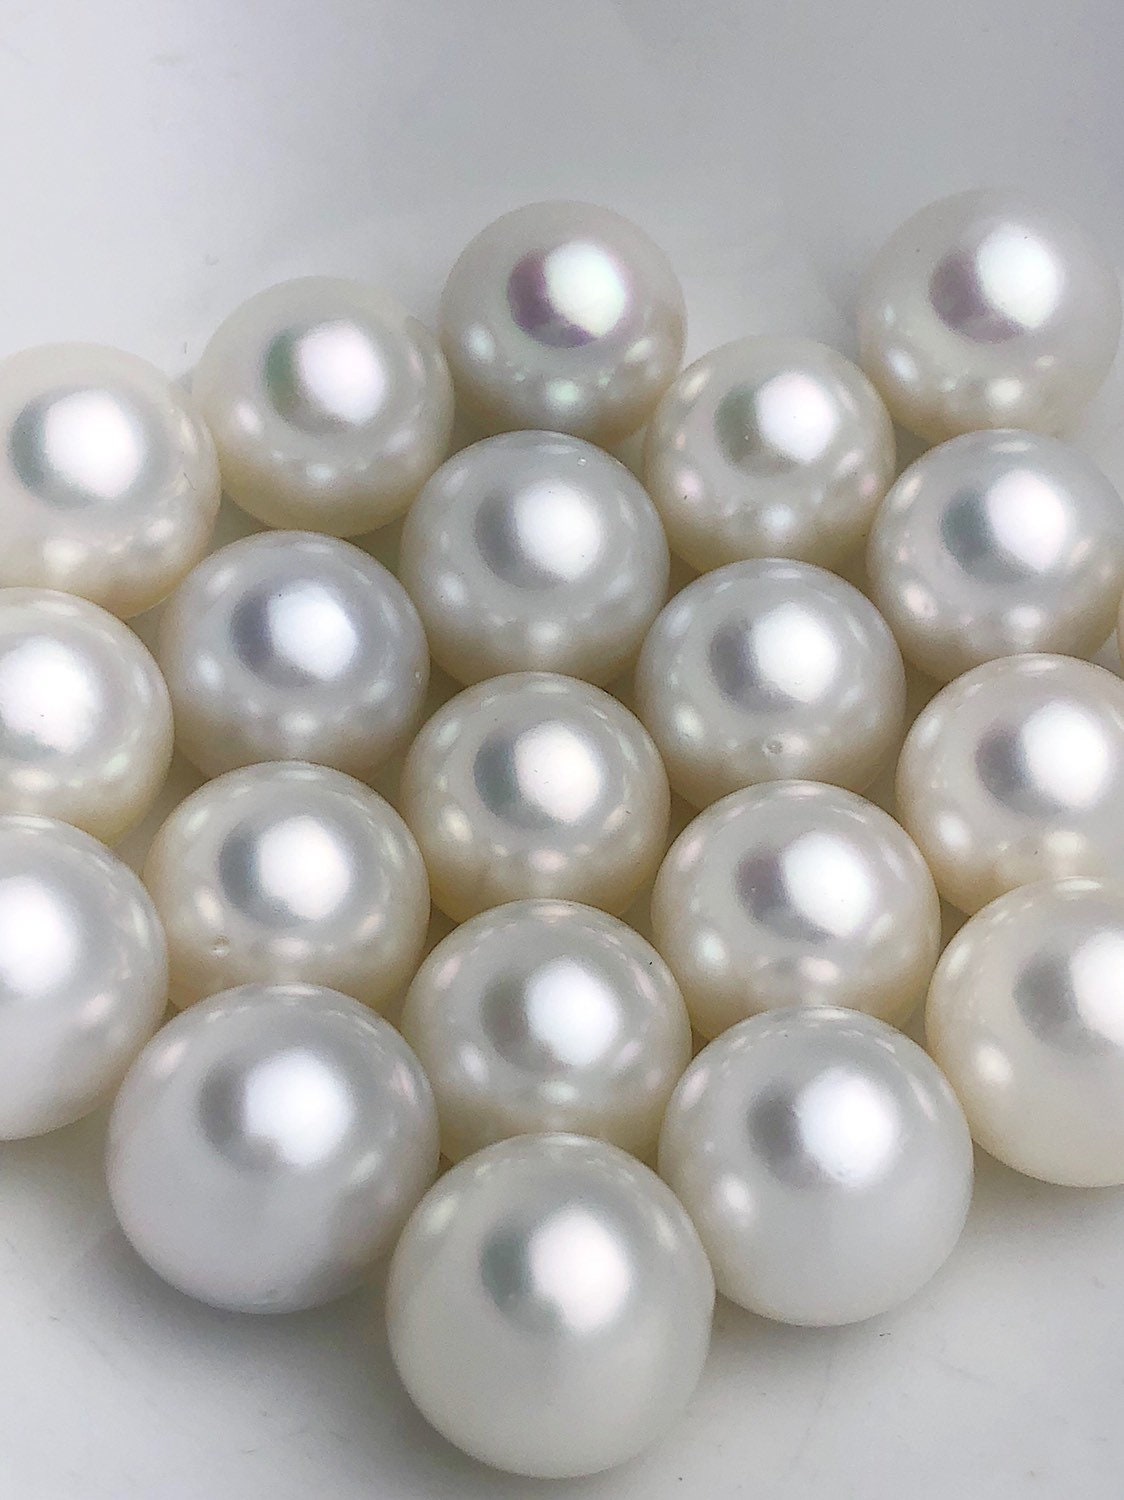 White Pearls  Save up to 80% with Pearls Only France